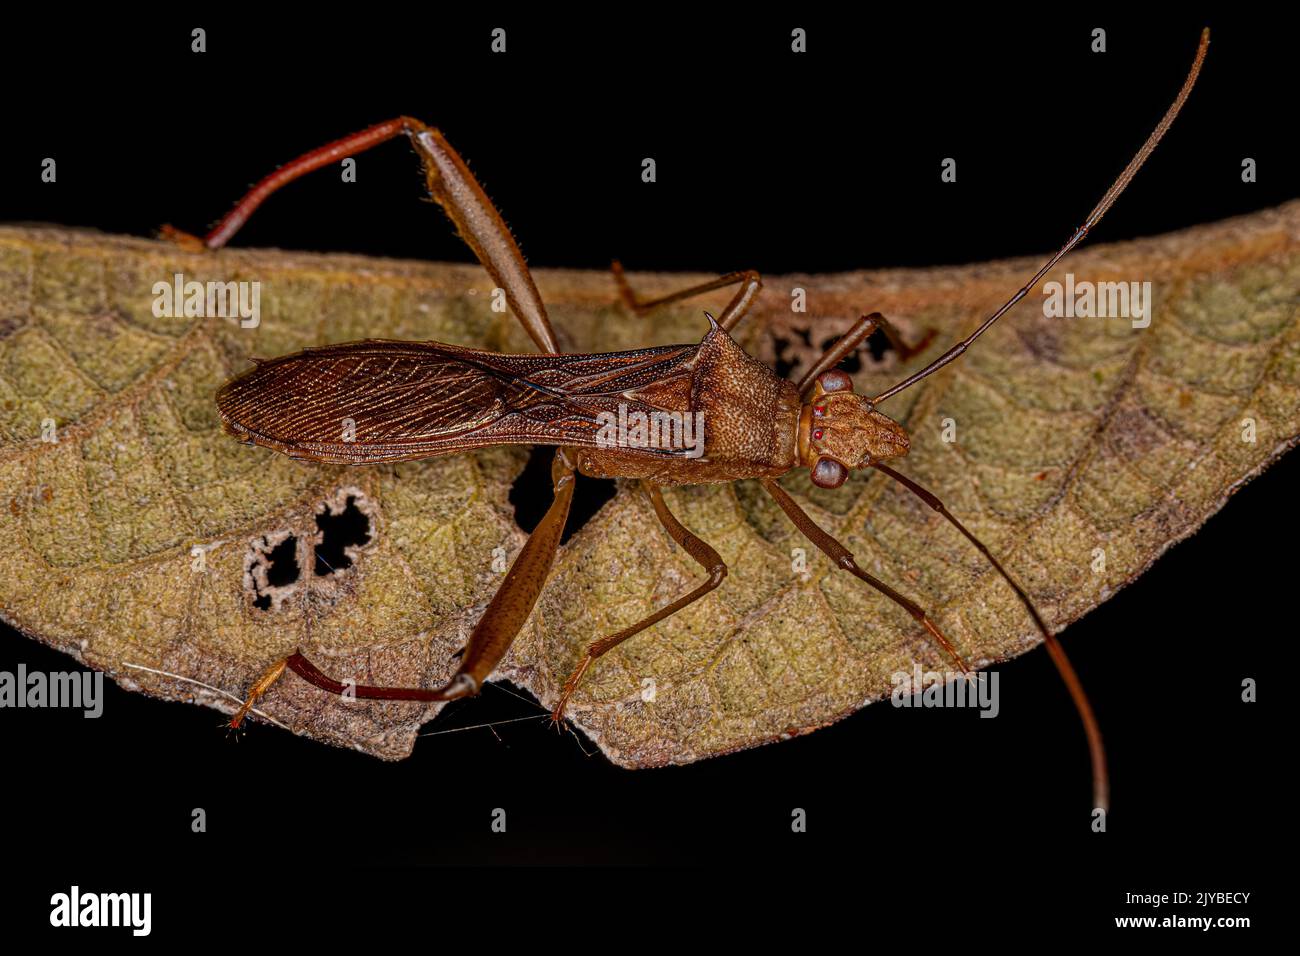 Adult Broad-headed Bug of the family Alydidae Stock Photo